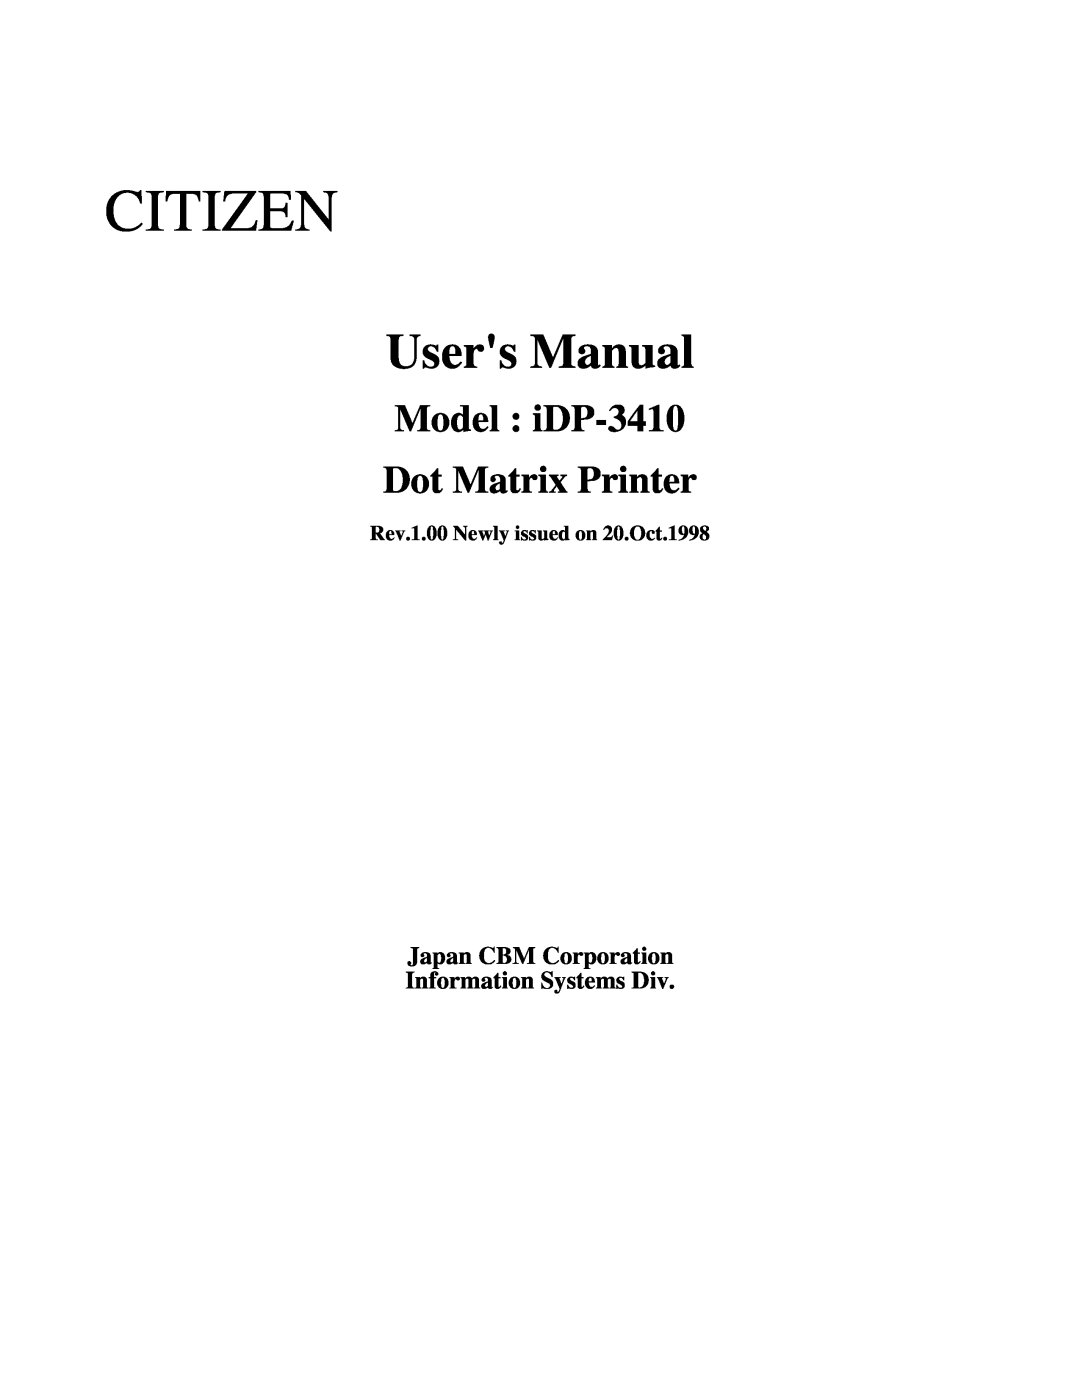 Addlogix iDP-3410 user manual Japan CBM Corporation Information Systems Div, Rev.1.00 Newly issued on 20.Oct.1998, Citizen 